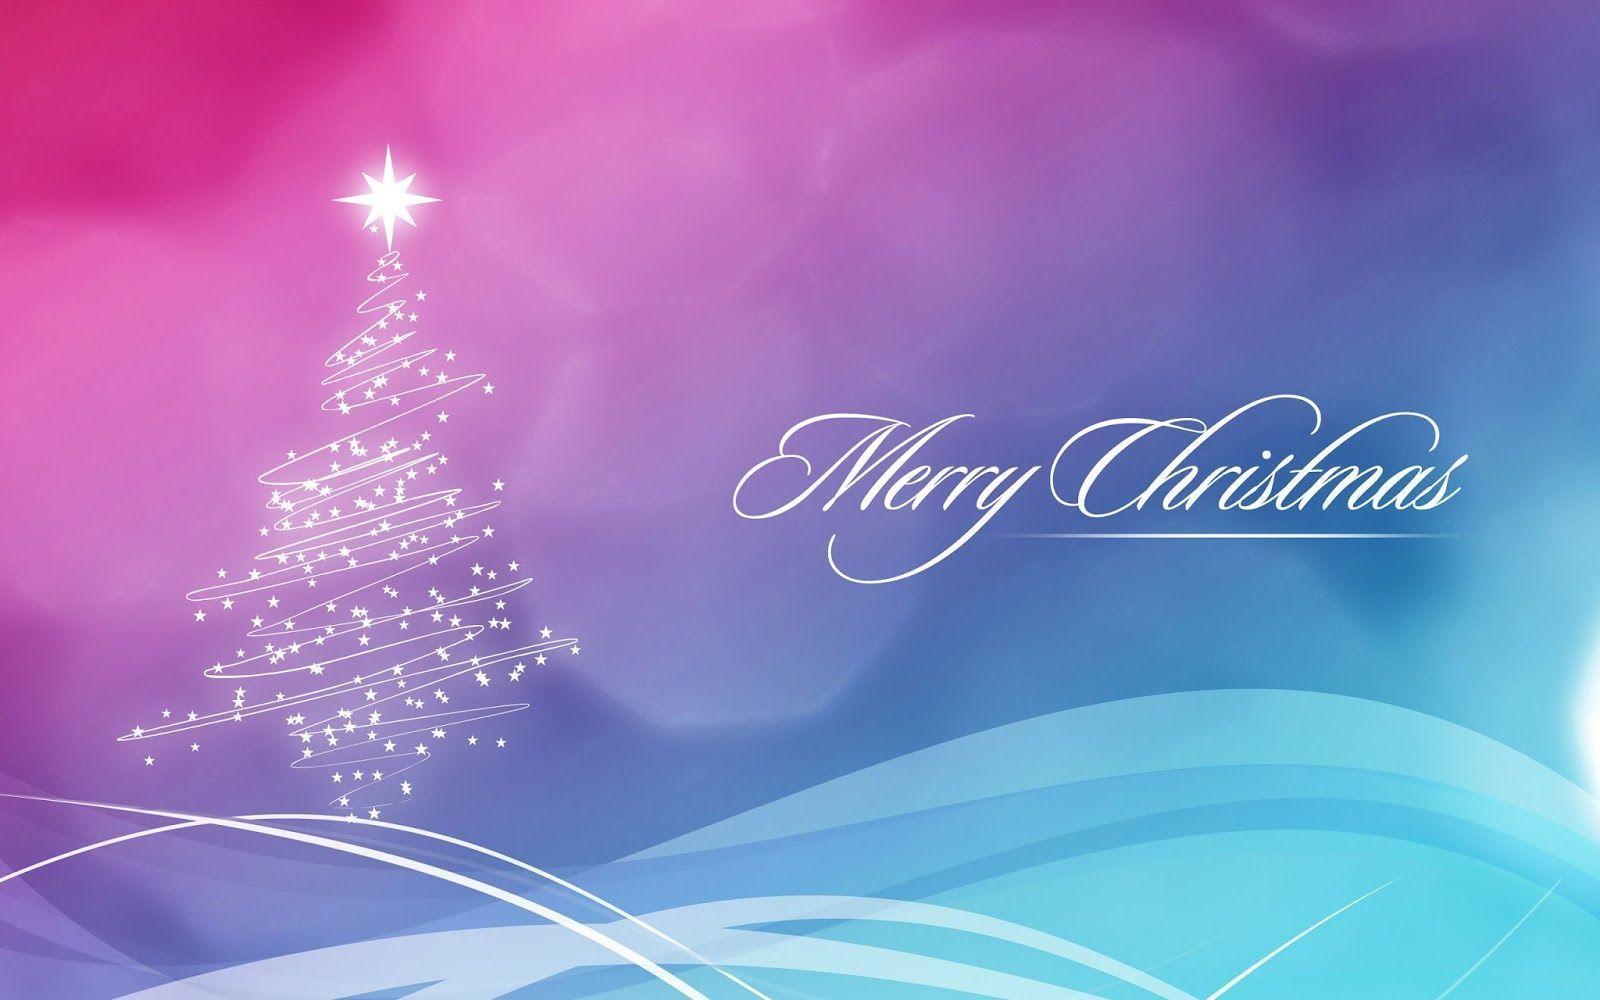 Merry Christmas 2016 Image & Wallpaper, Cards Wishes